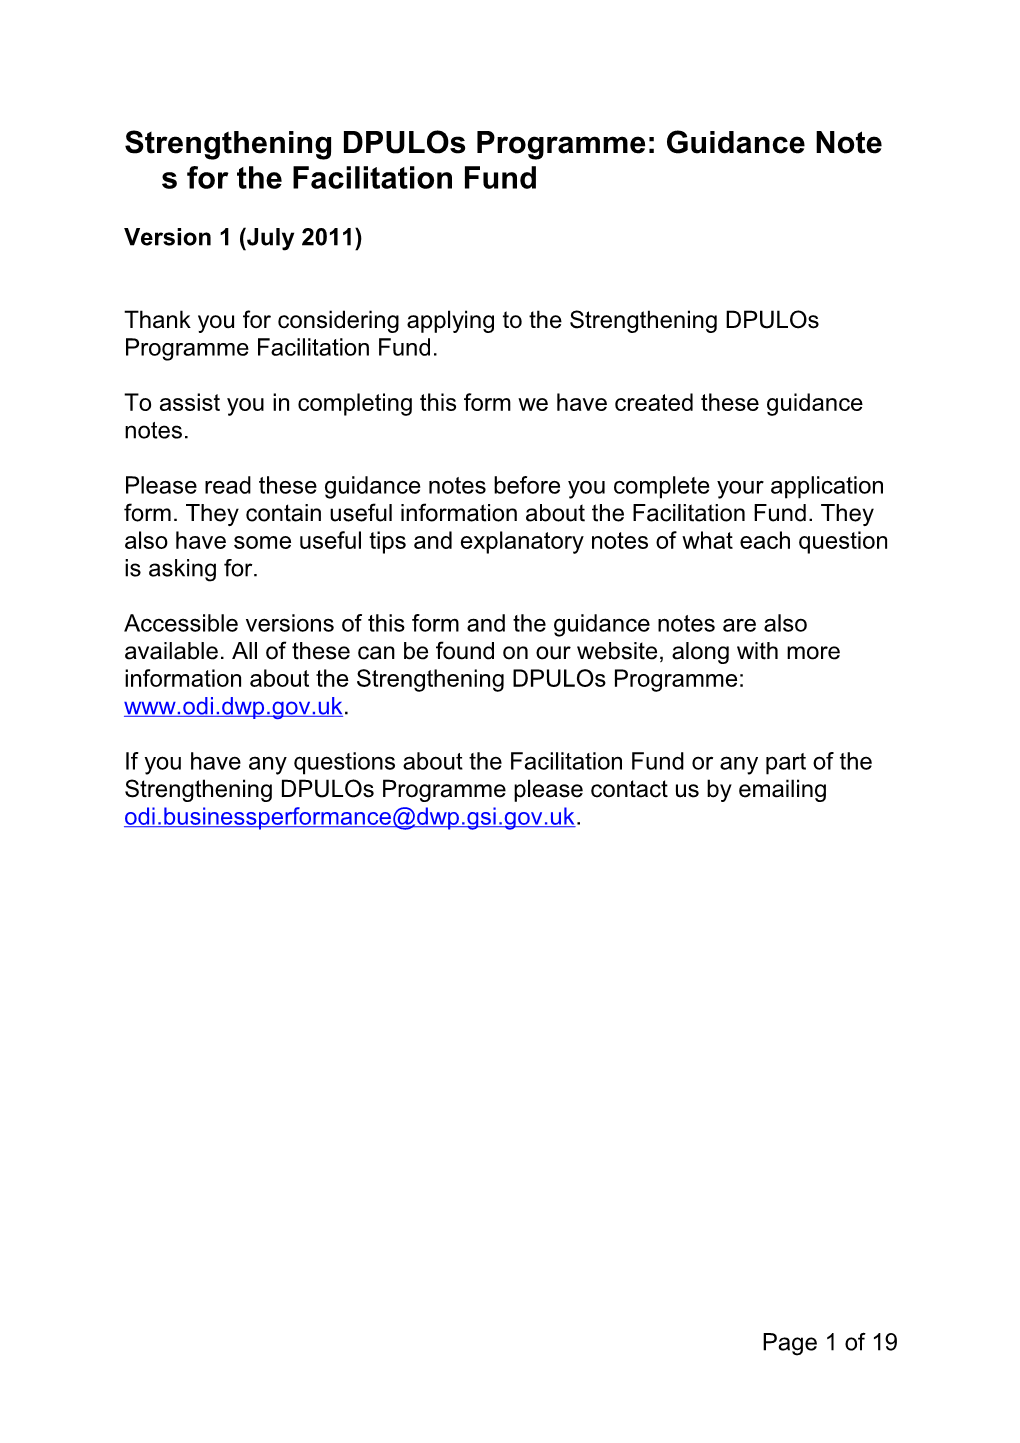 Strengthening Dpulos Programme: Guidance Notes for the Facilitation Fund